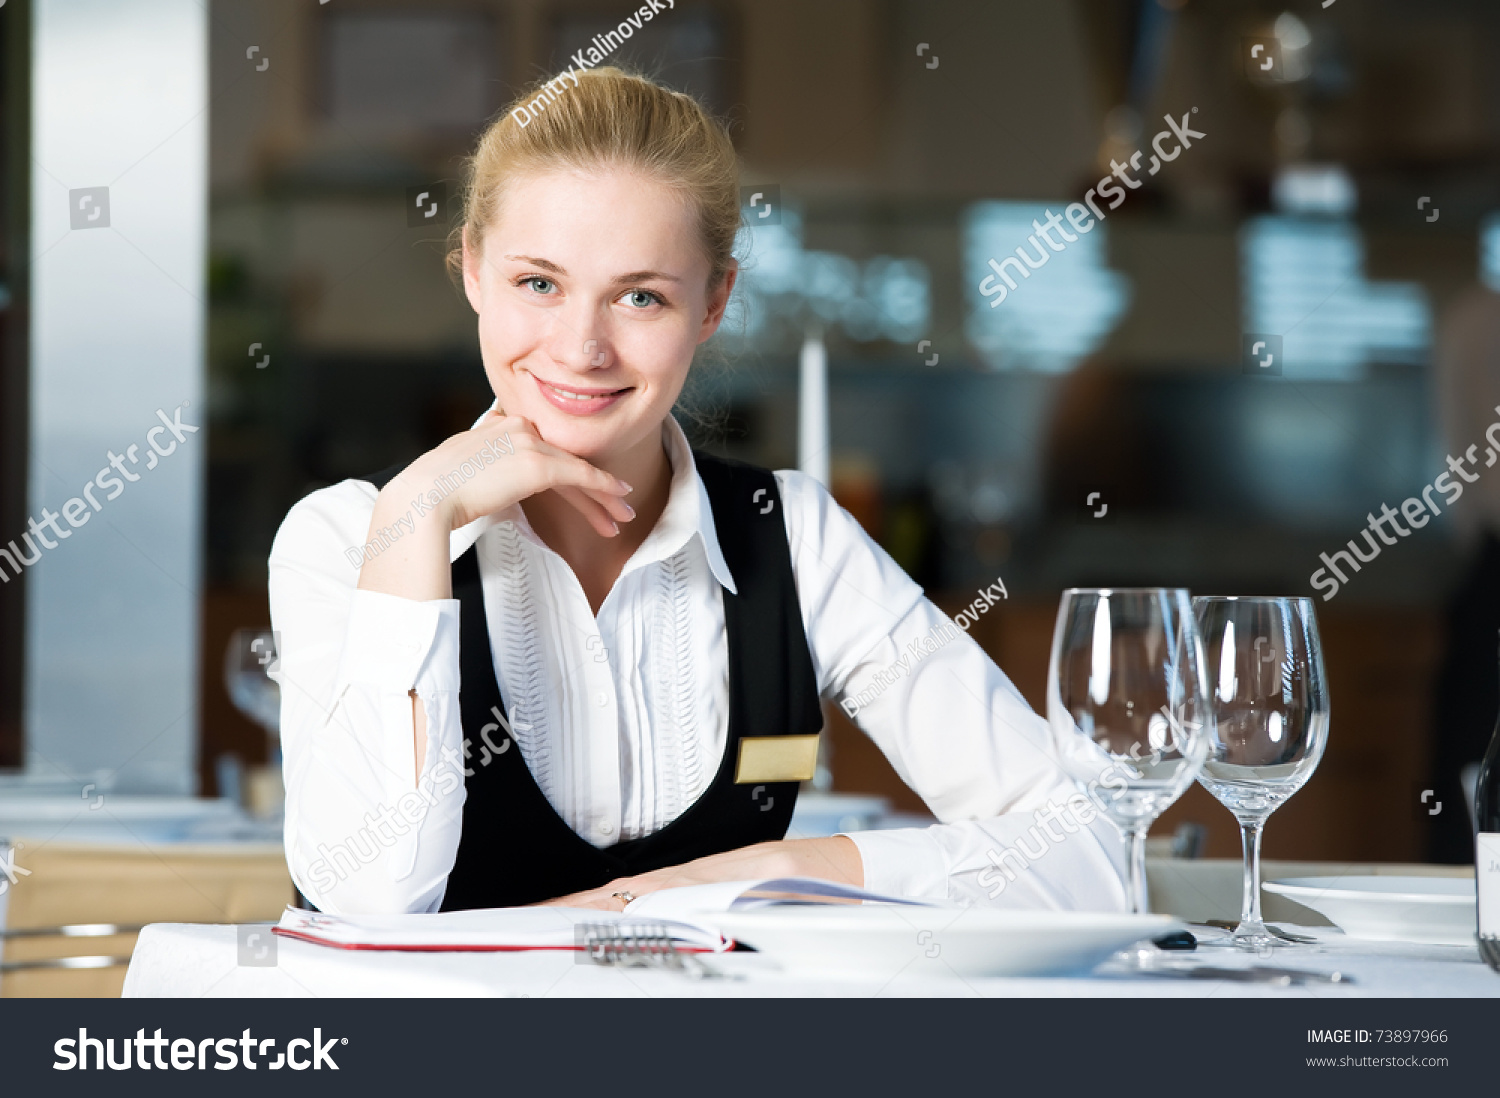 http://image.shutterstock.com/z/stock-photo-happy-beautiful-restaurant-manager-woman-administrator-at-work-place-73897966.jpg